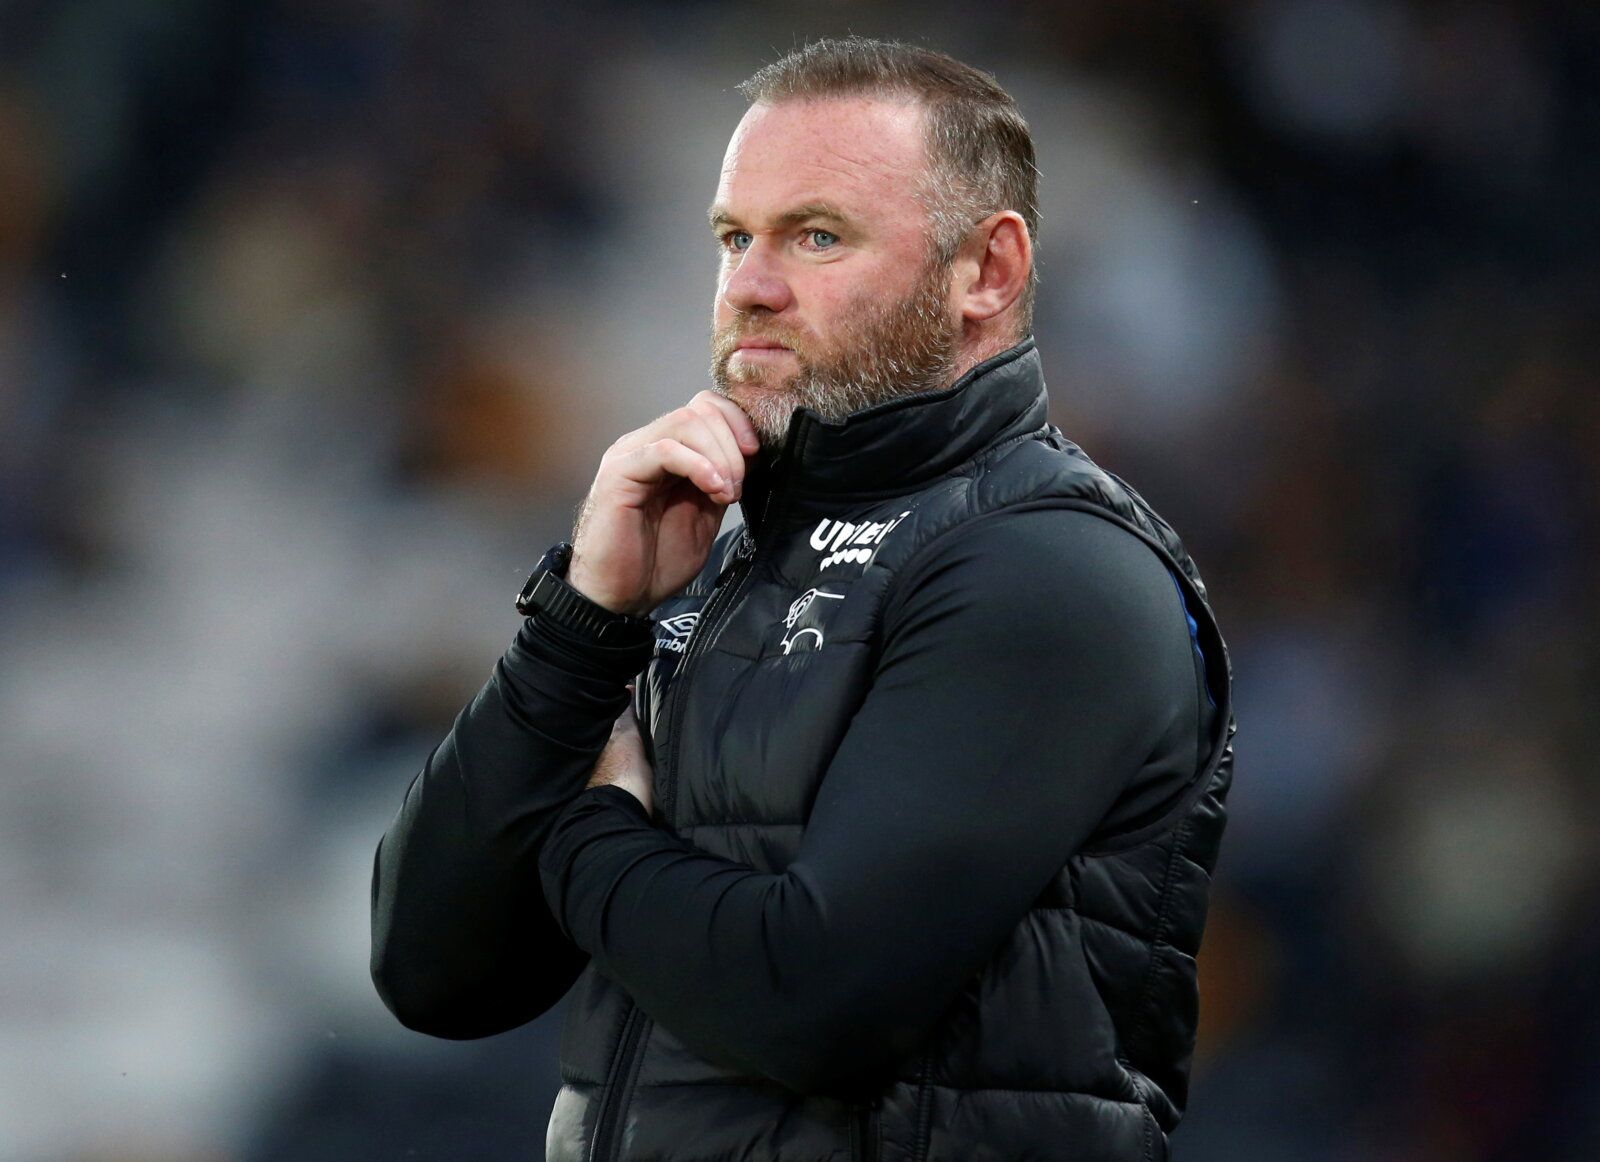 Soccer Football - Championship - Hull City v Derby County - KCOM Stadium, Hull, Britain - August 18, 2021  Derby County manager Wayne Rooney  Action Images/Ed Sykes  EDITORIAL USE ONLY. No use with unauthorized audio, video, data, fixture lists, club/league logos or 